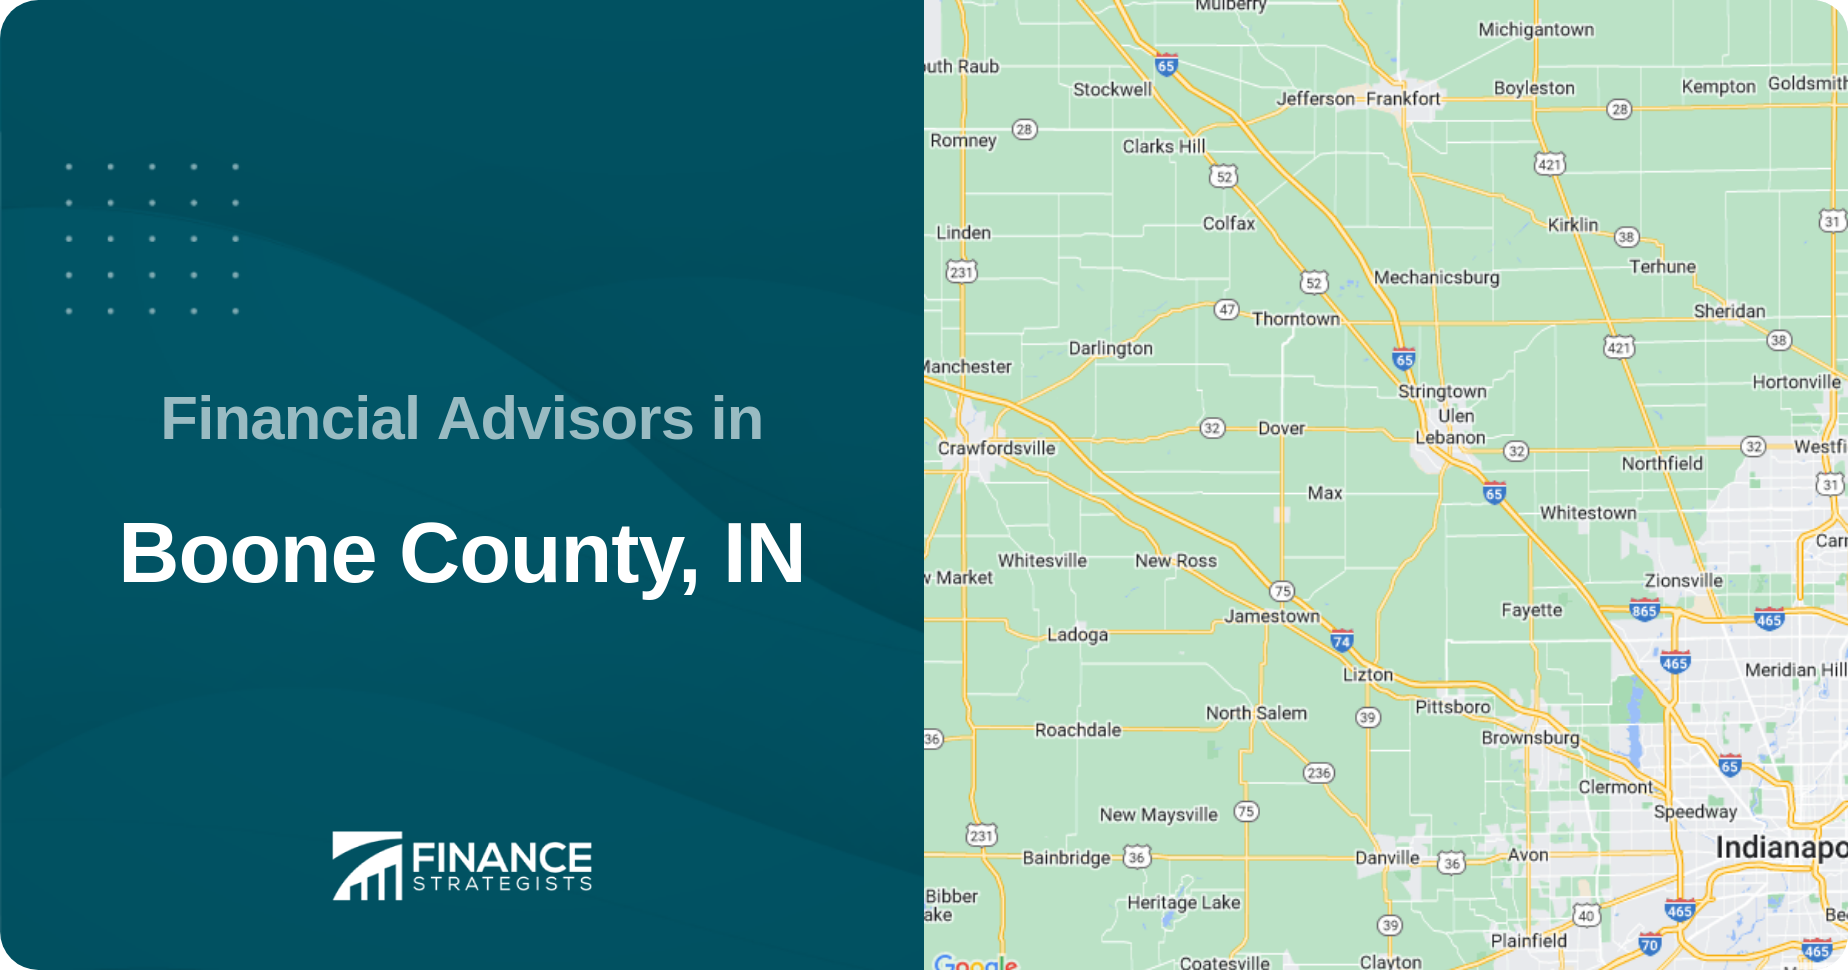 Financial Advisors in Boone County, IN